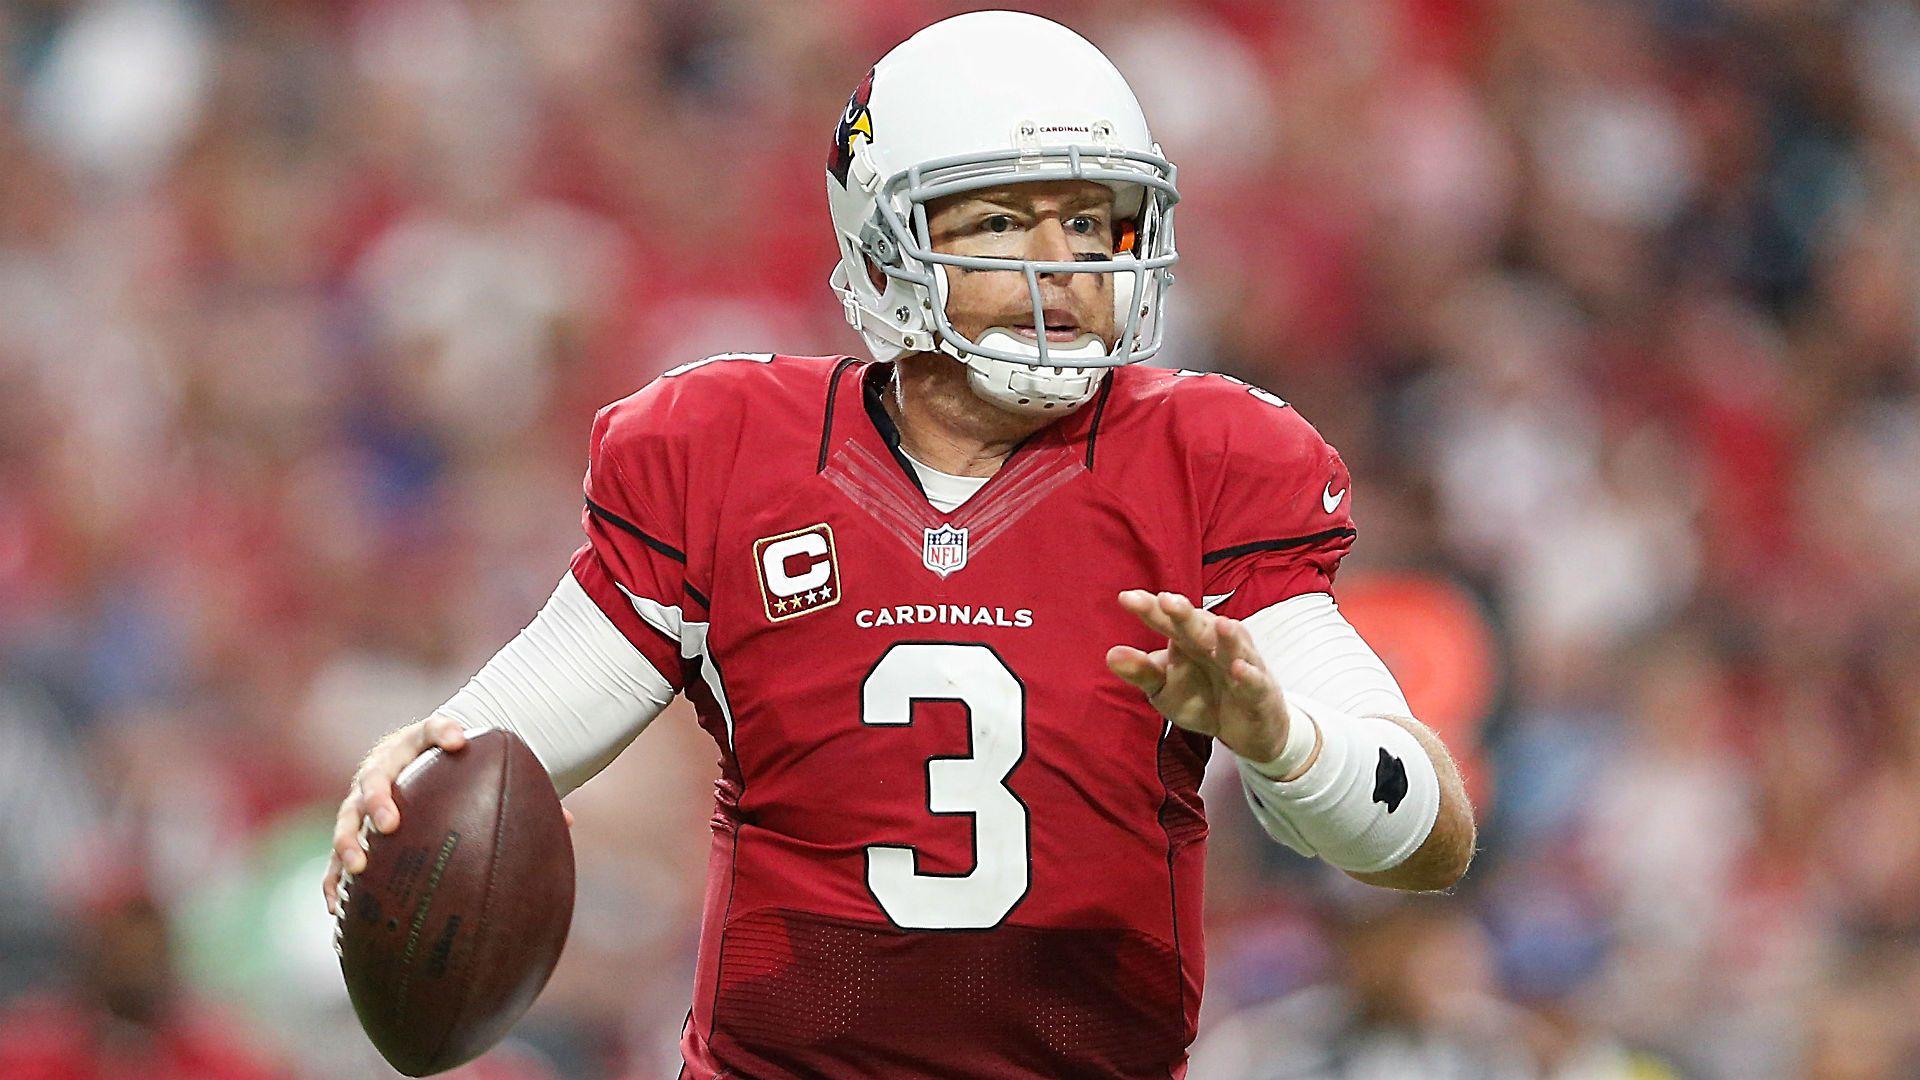 Carson Palmer sharp in first action since ACL injury. NFL